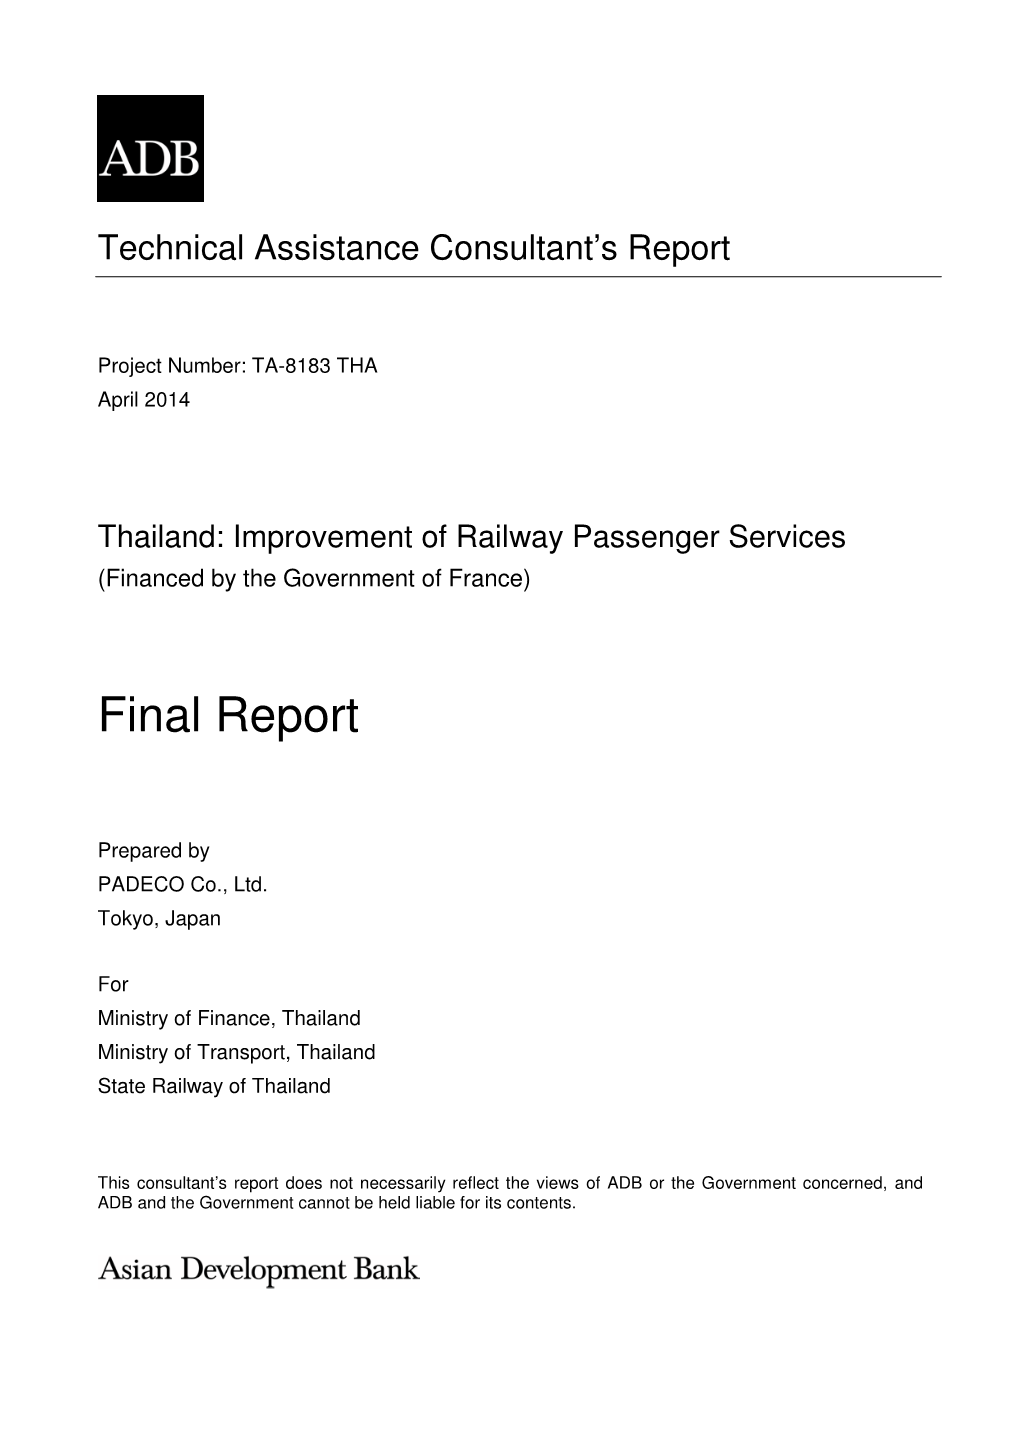 Thailand: Improvement of Railway Passenger Services (Financed by the Government of France)